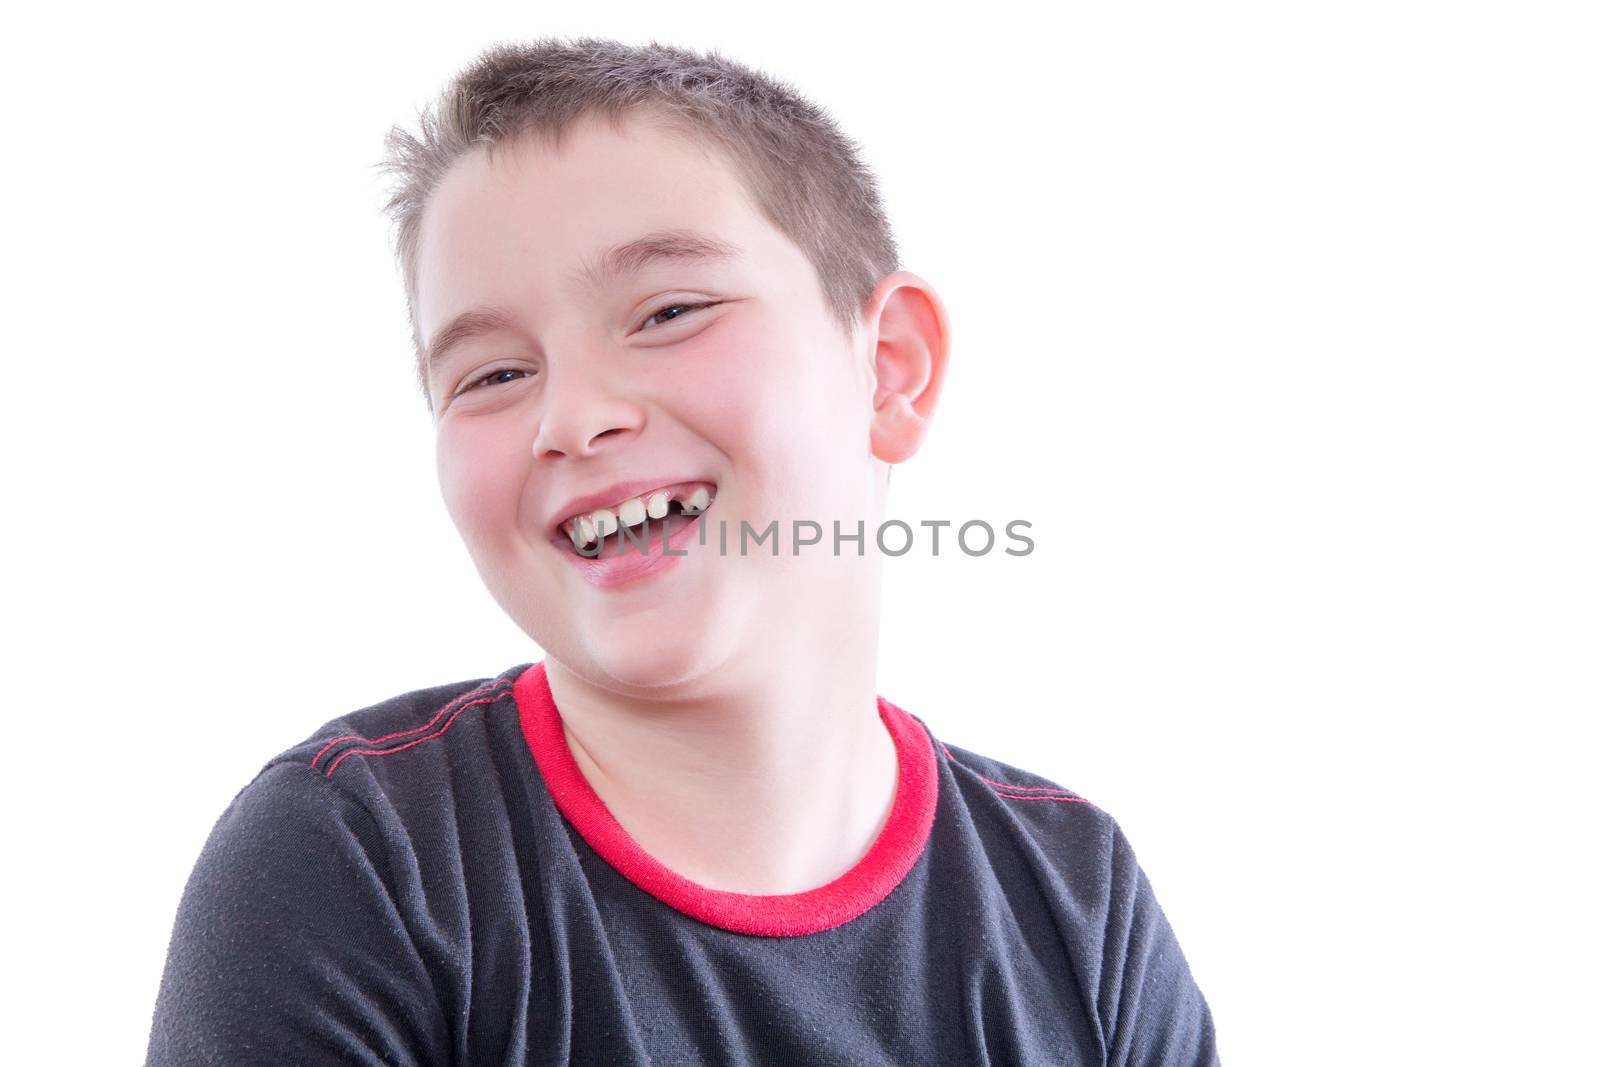 Young Boy with Braces on Teeth Laughing in Studio by coskun